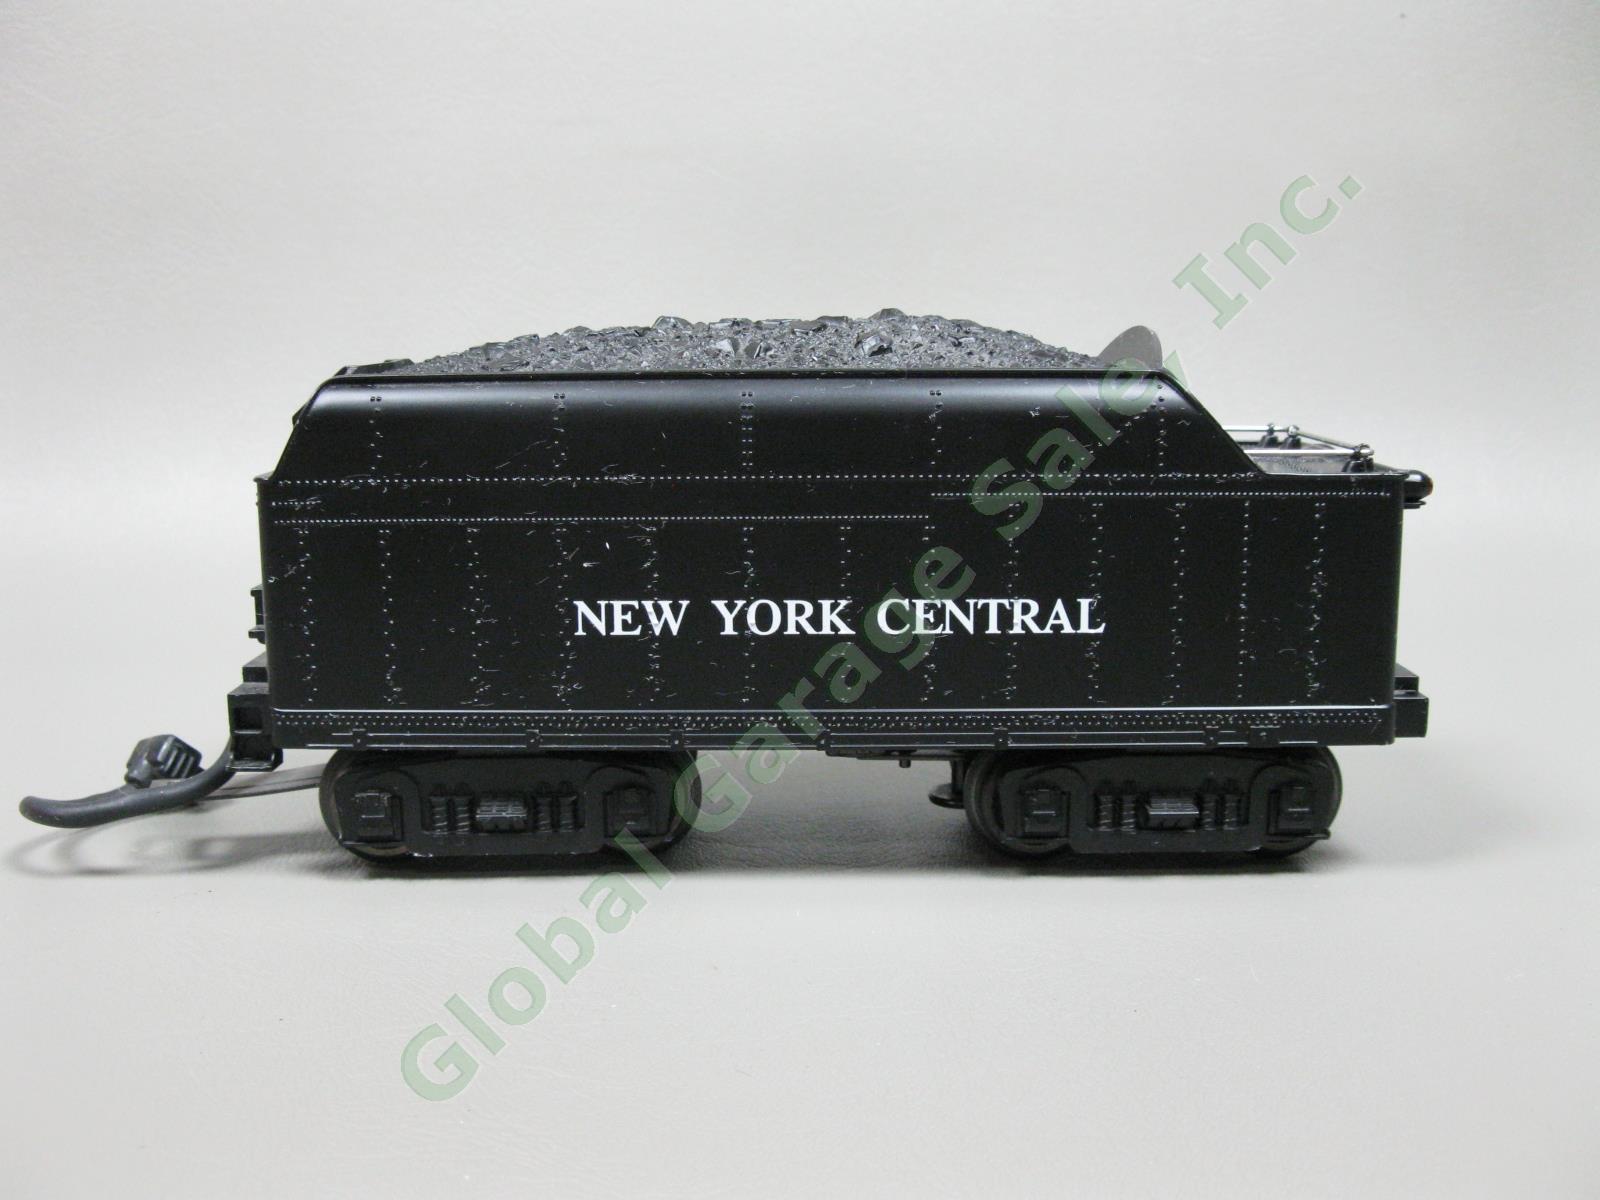 Lionel O Scale New York Central 4-6-2 Pacific Steam Locomotive Mint #6-18086 NR 9